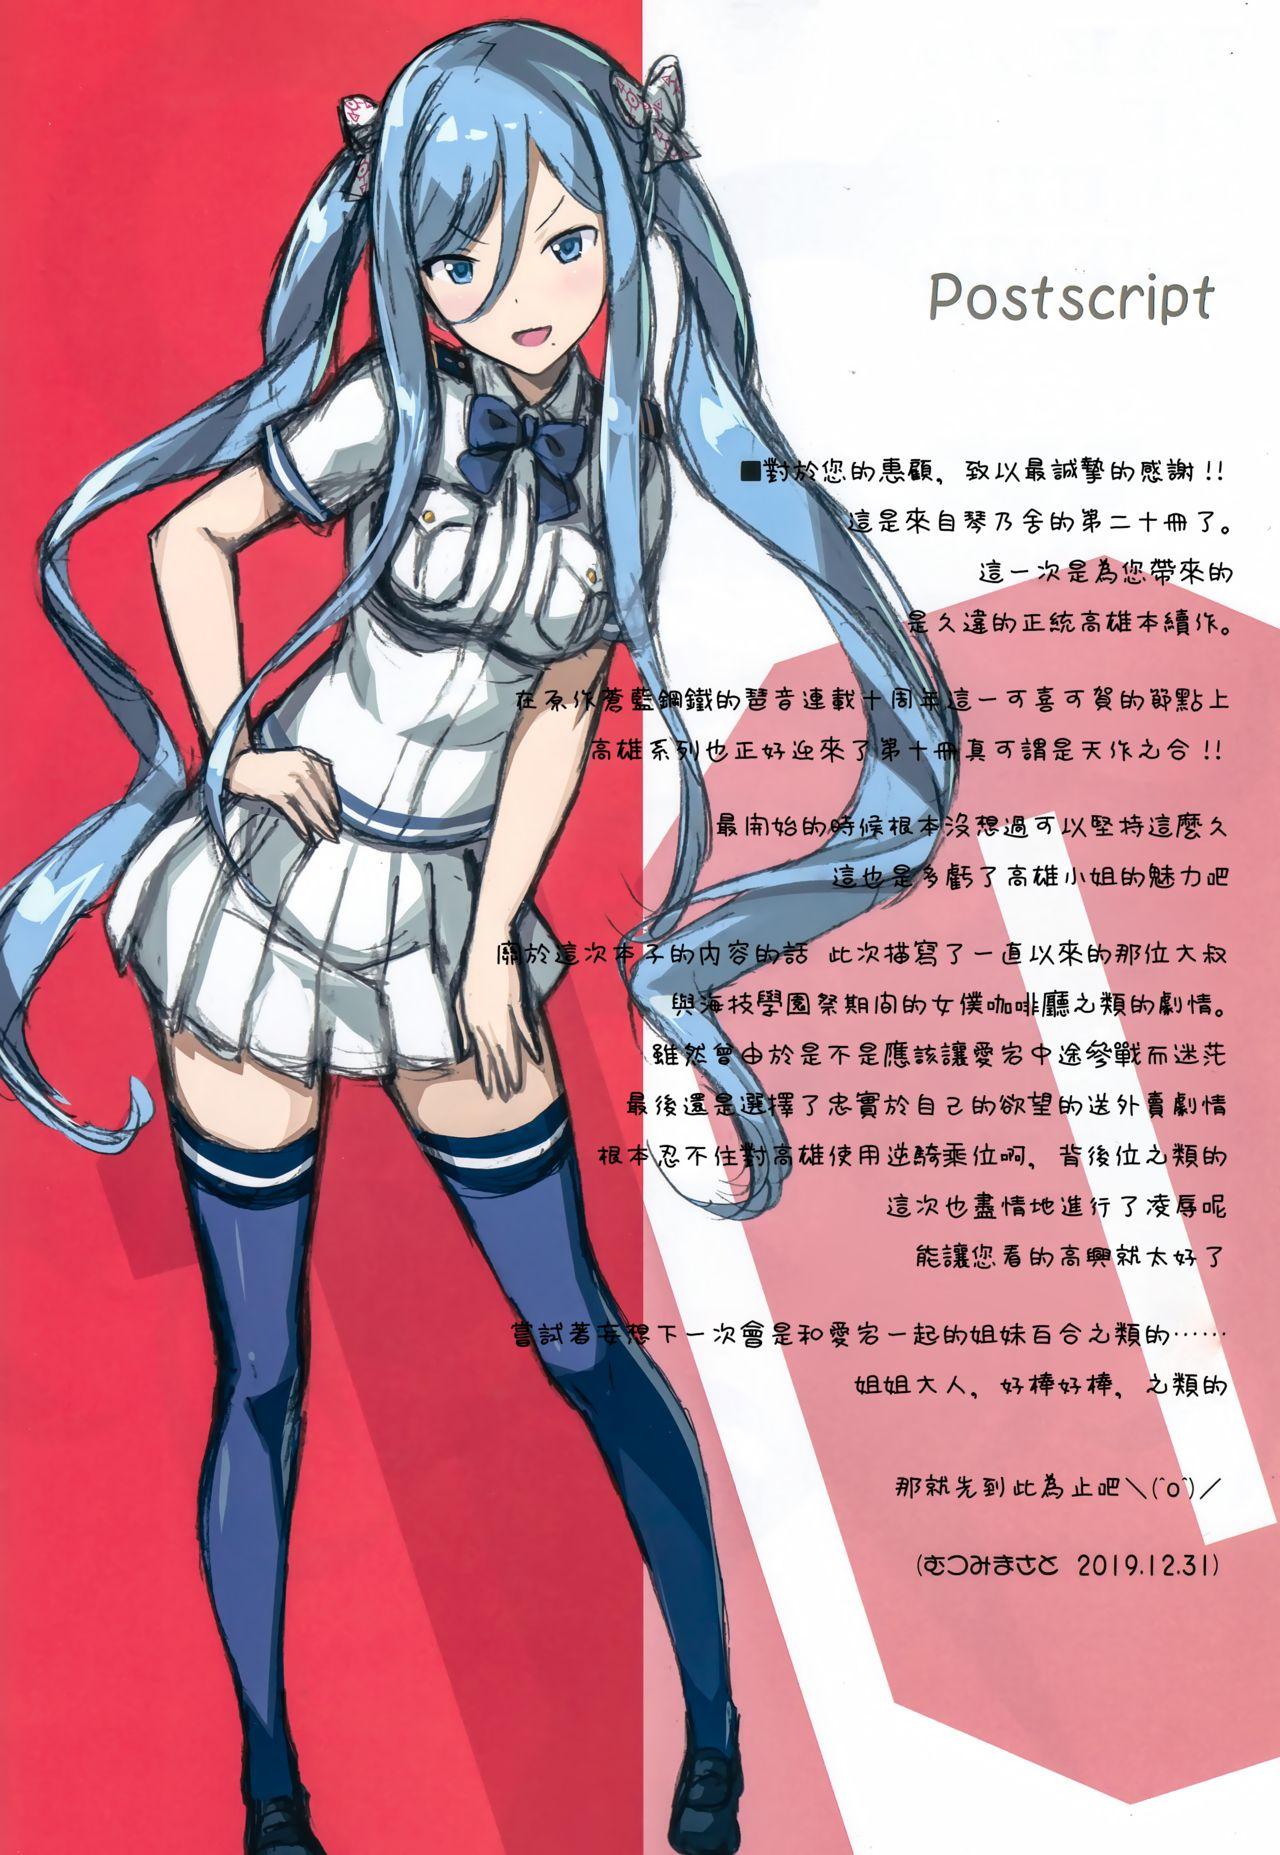 Canadian TAKAO OF BLUE STEEL 10 - Arpeggio of blue steel Free Fuck - Page 4